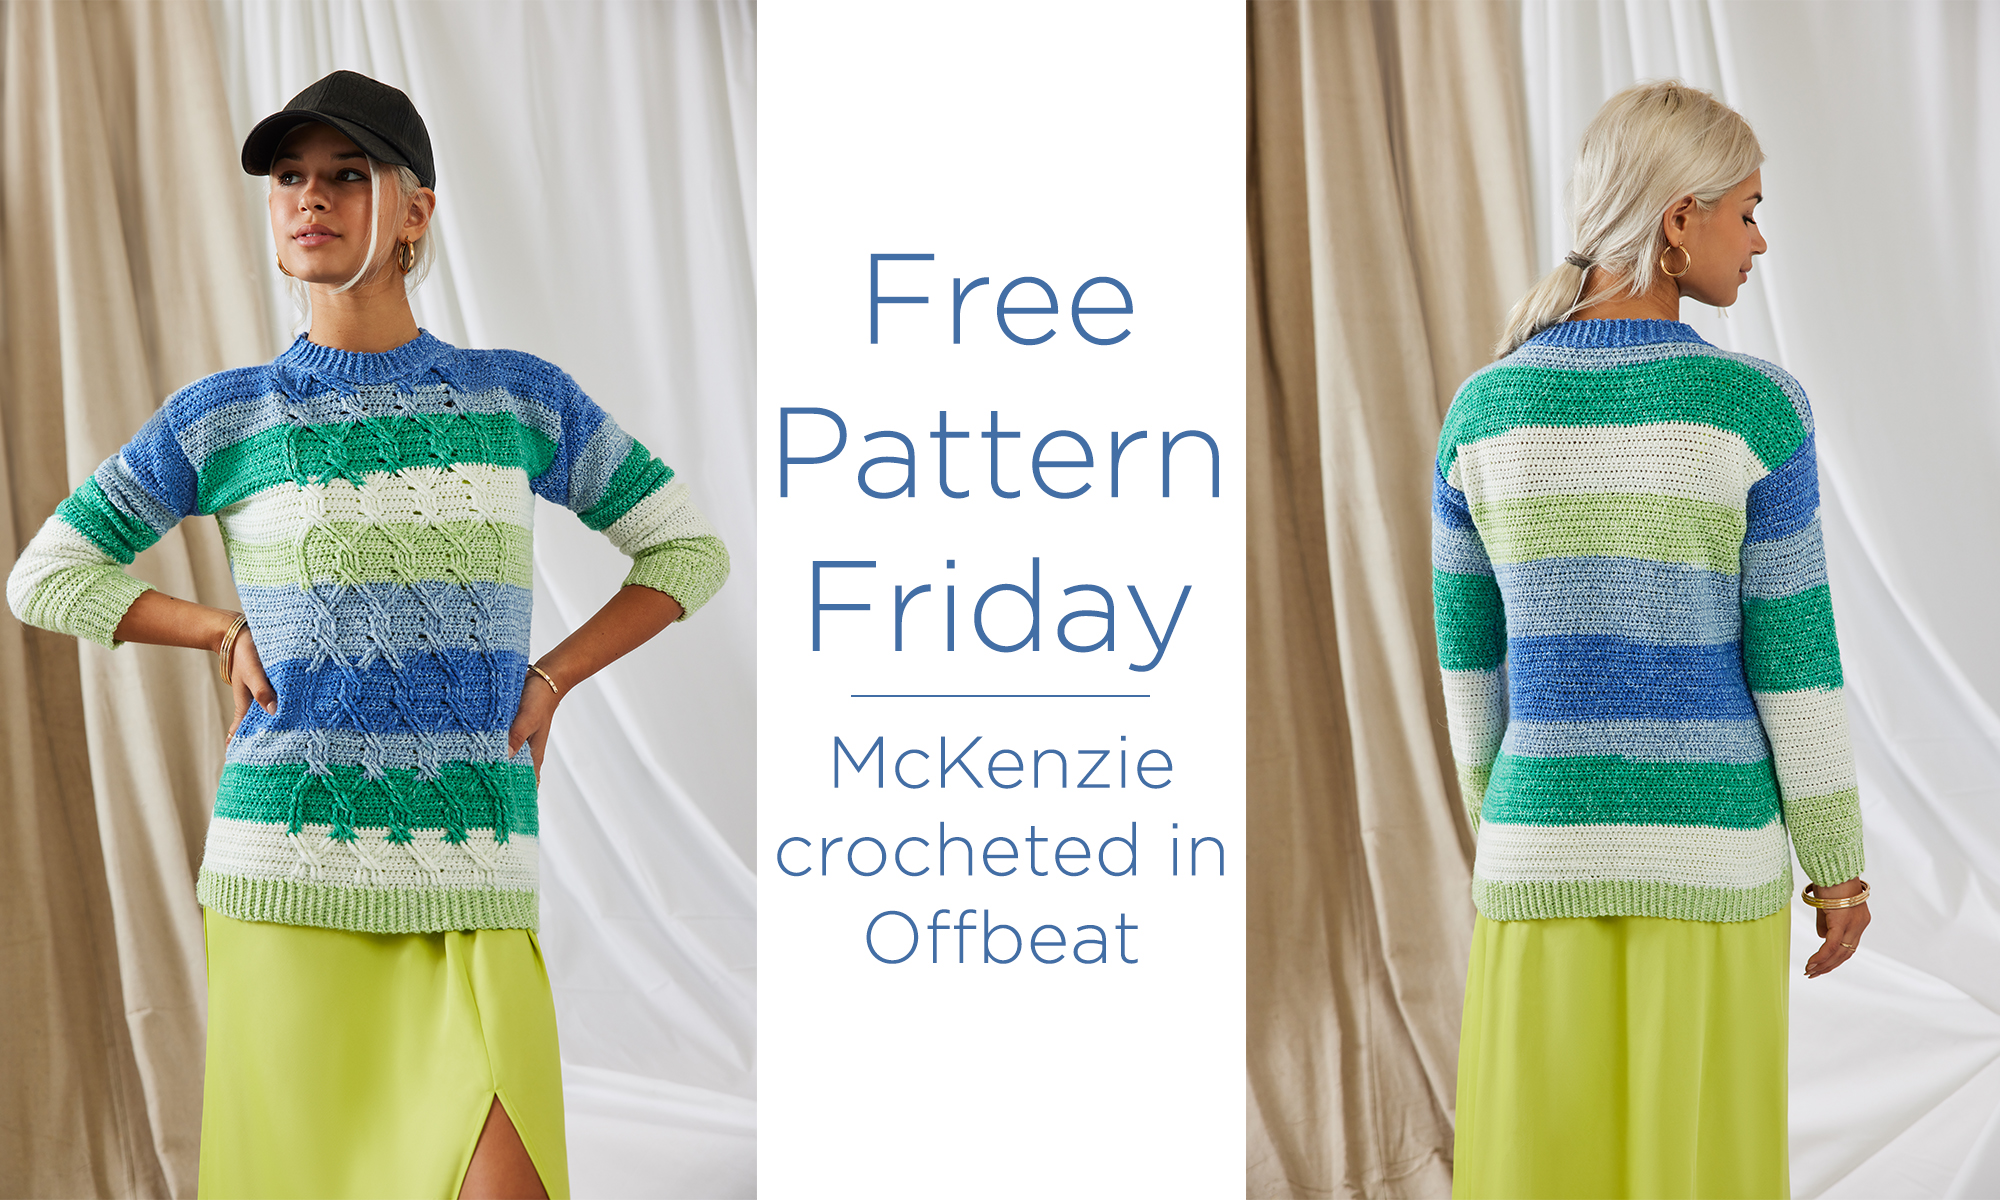 On the left, a woman models a crochet sweater featuring cable designs. The center reads "Free Pattern Friday. McKenzie crocheted in Offbeat." The right side of the photo shows the woman facing backwards, modeling the back of the sweater which is a smooth fabric with no cables.